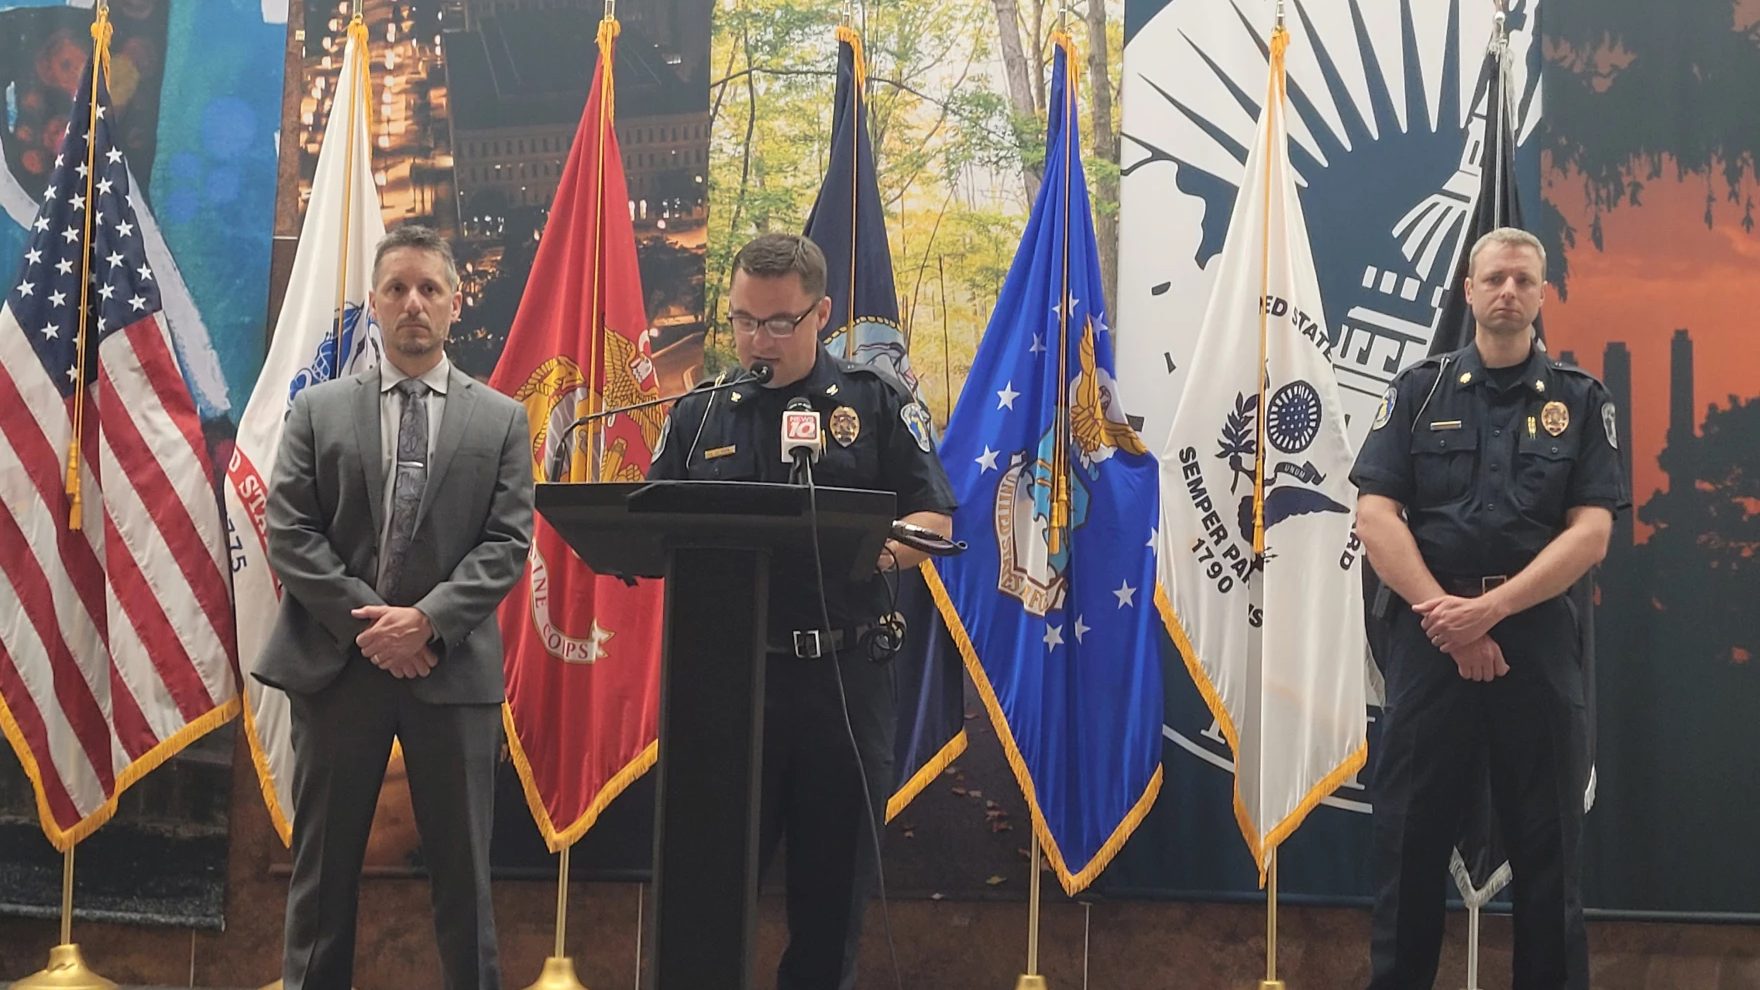 Lansing Police Chief Ellery Sosebee speaks into a micophone on a lectern, on his left is Supervisory Special Resident Agent Mark Civiletto with the FBI and on is right is Assistant Chief Robert Backus.